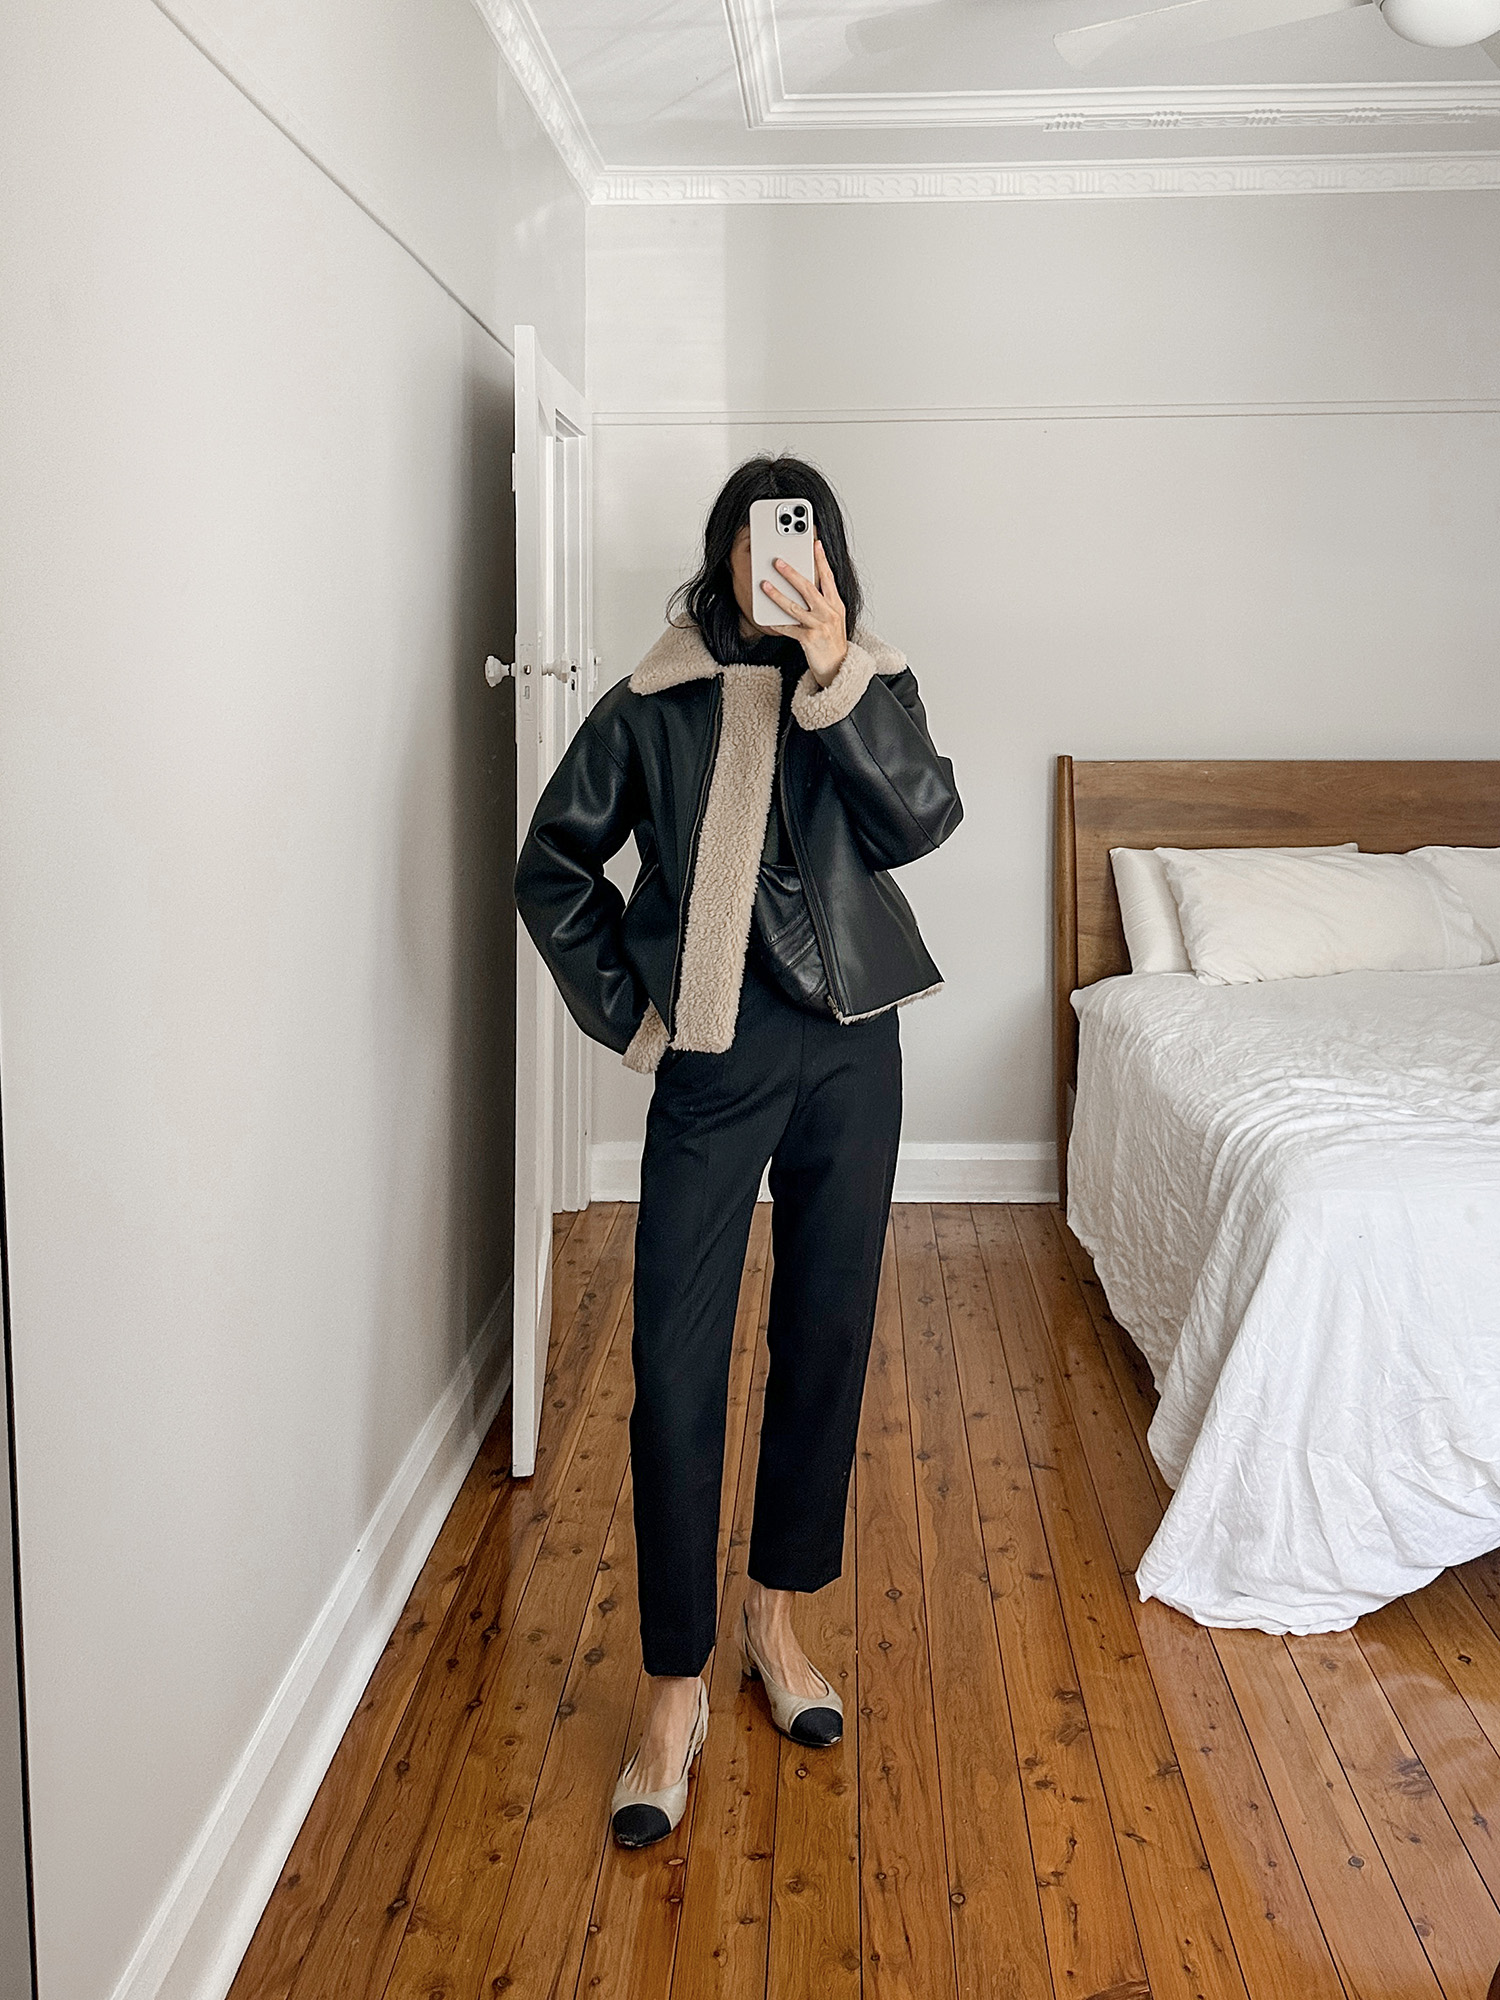 Wearing Everlane recashmere sweater with Facade Pattern Shearling jacket and Arket trousers